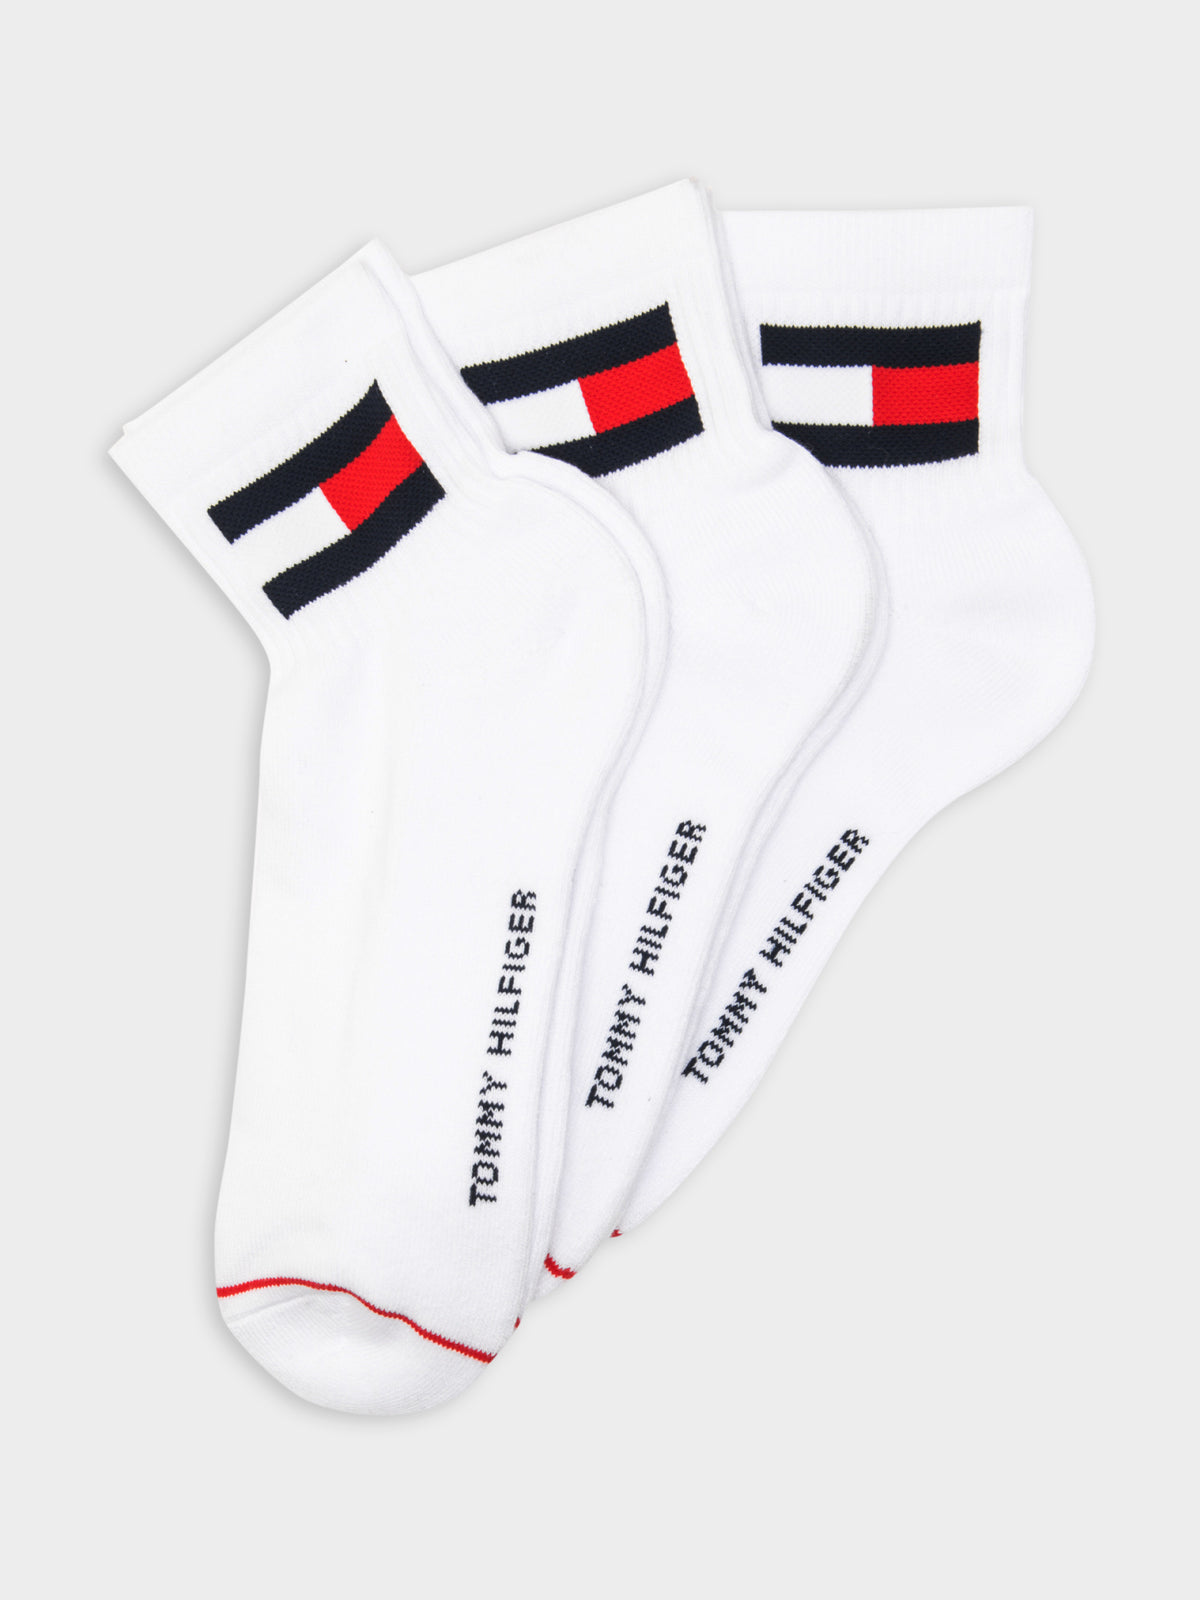 3 Pairs of Quarter Ankle Socks in White